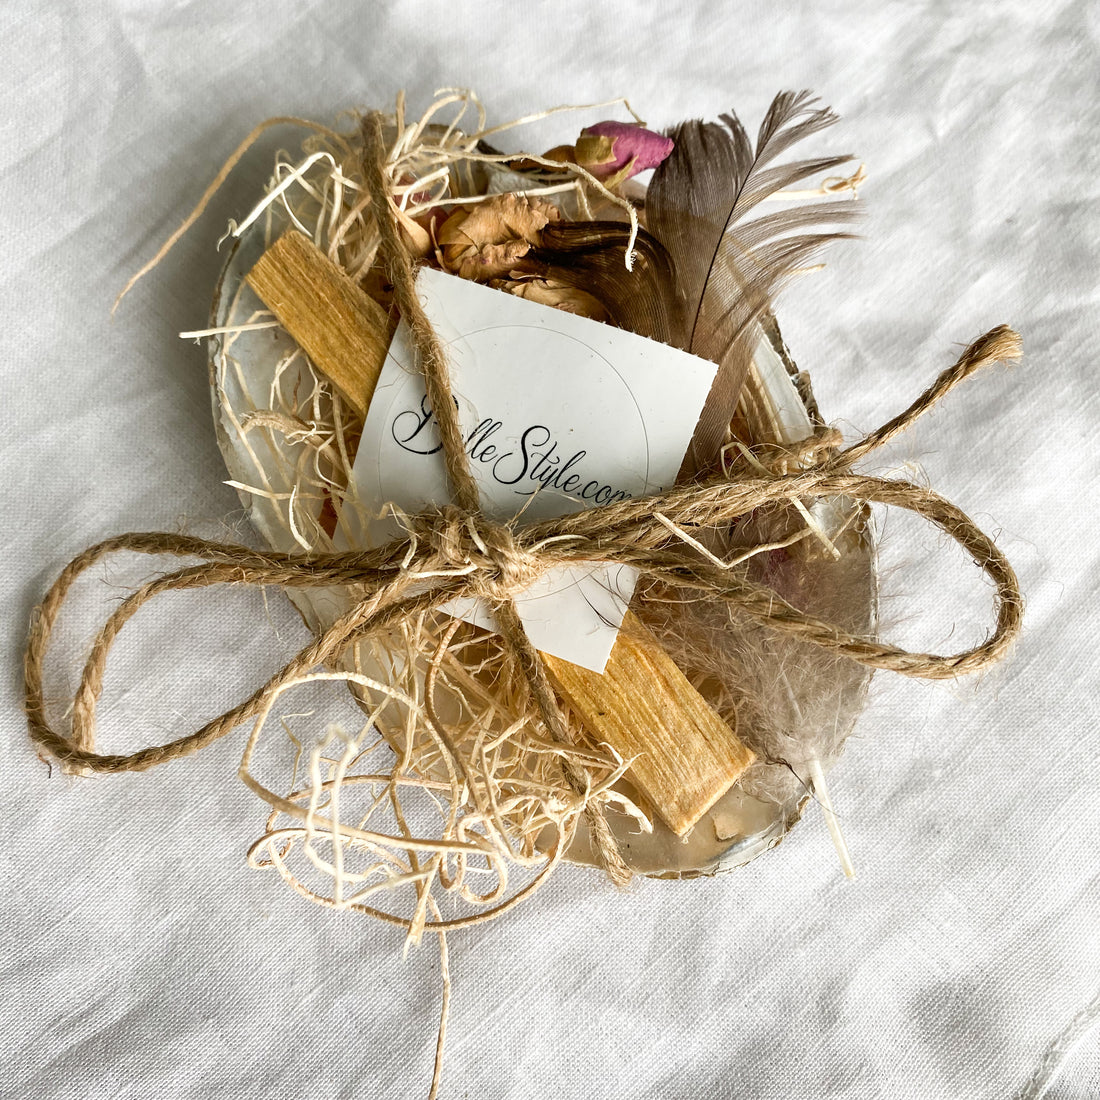 Palo Santo and Why We Love It